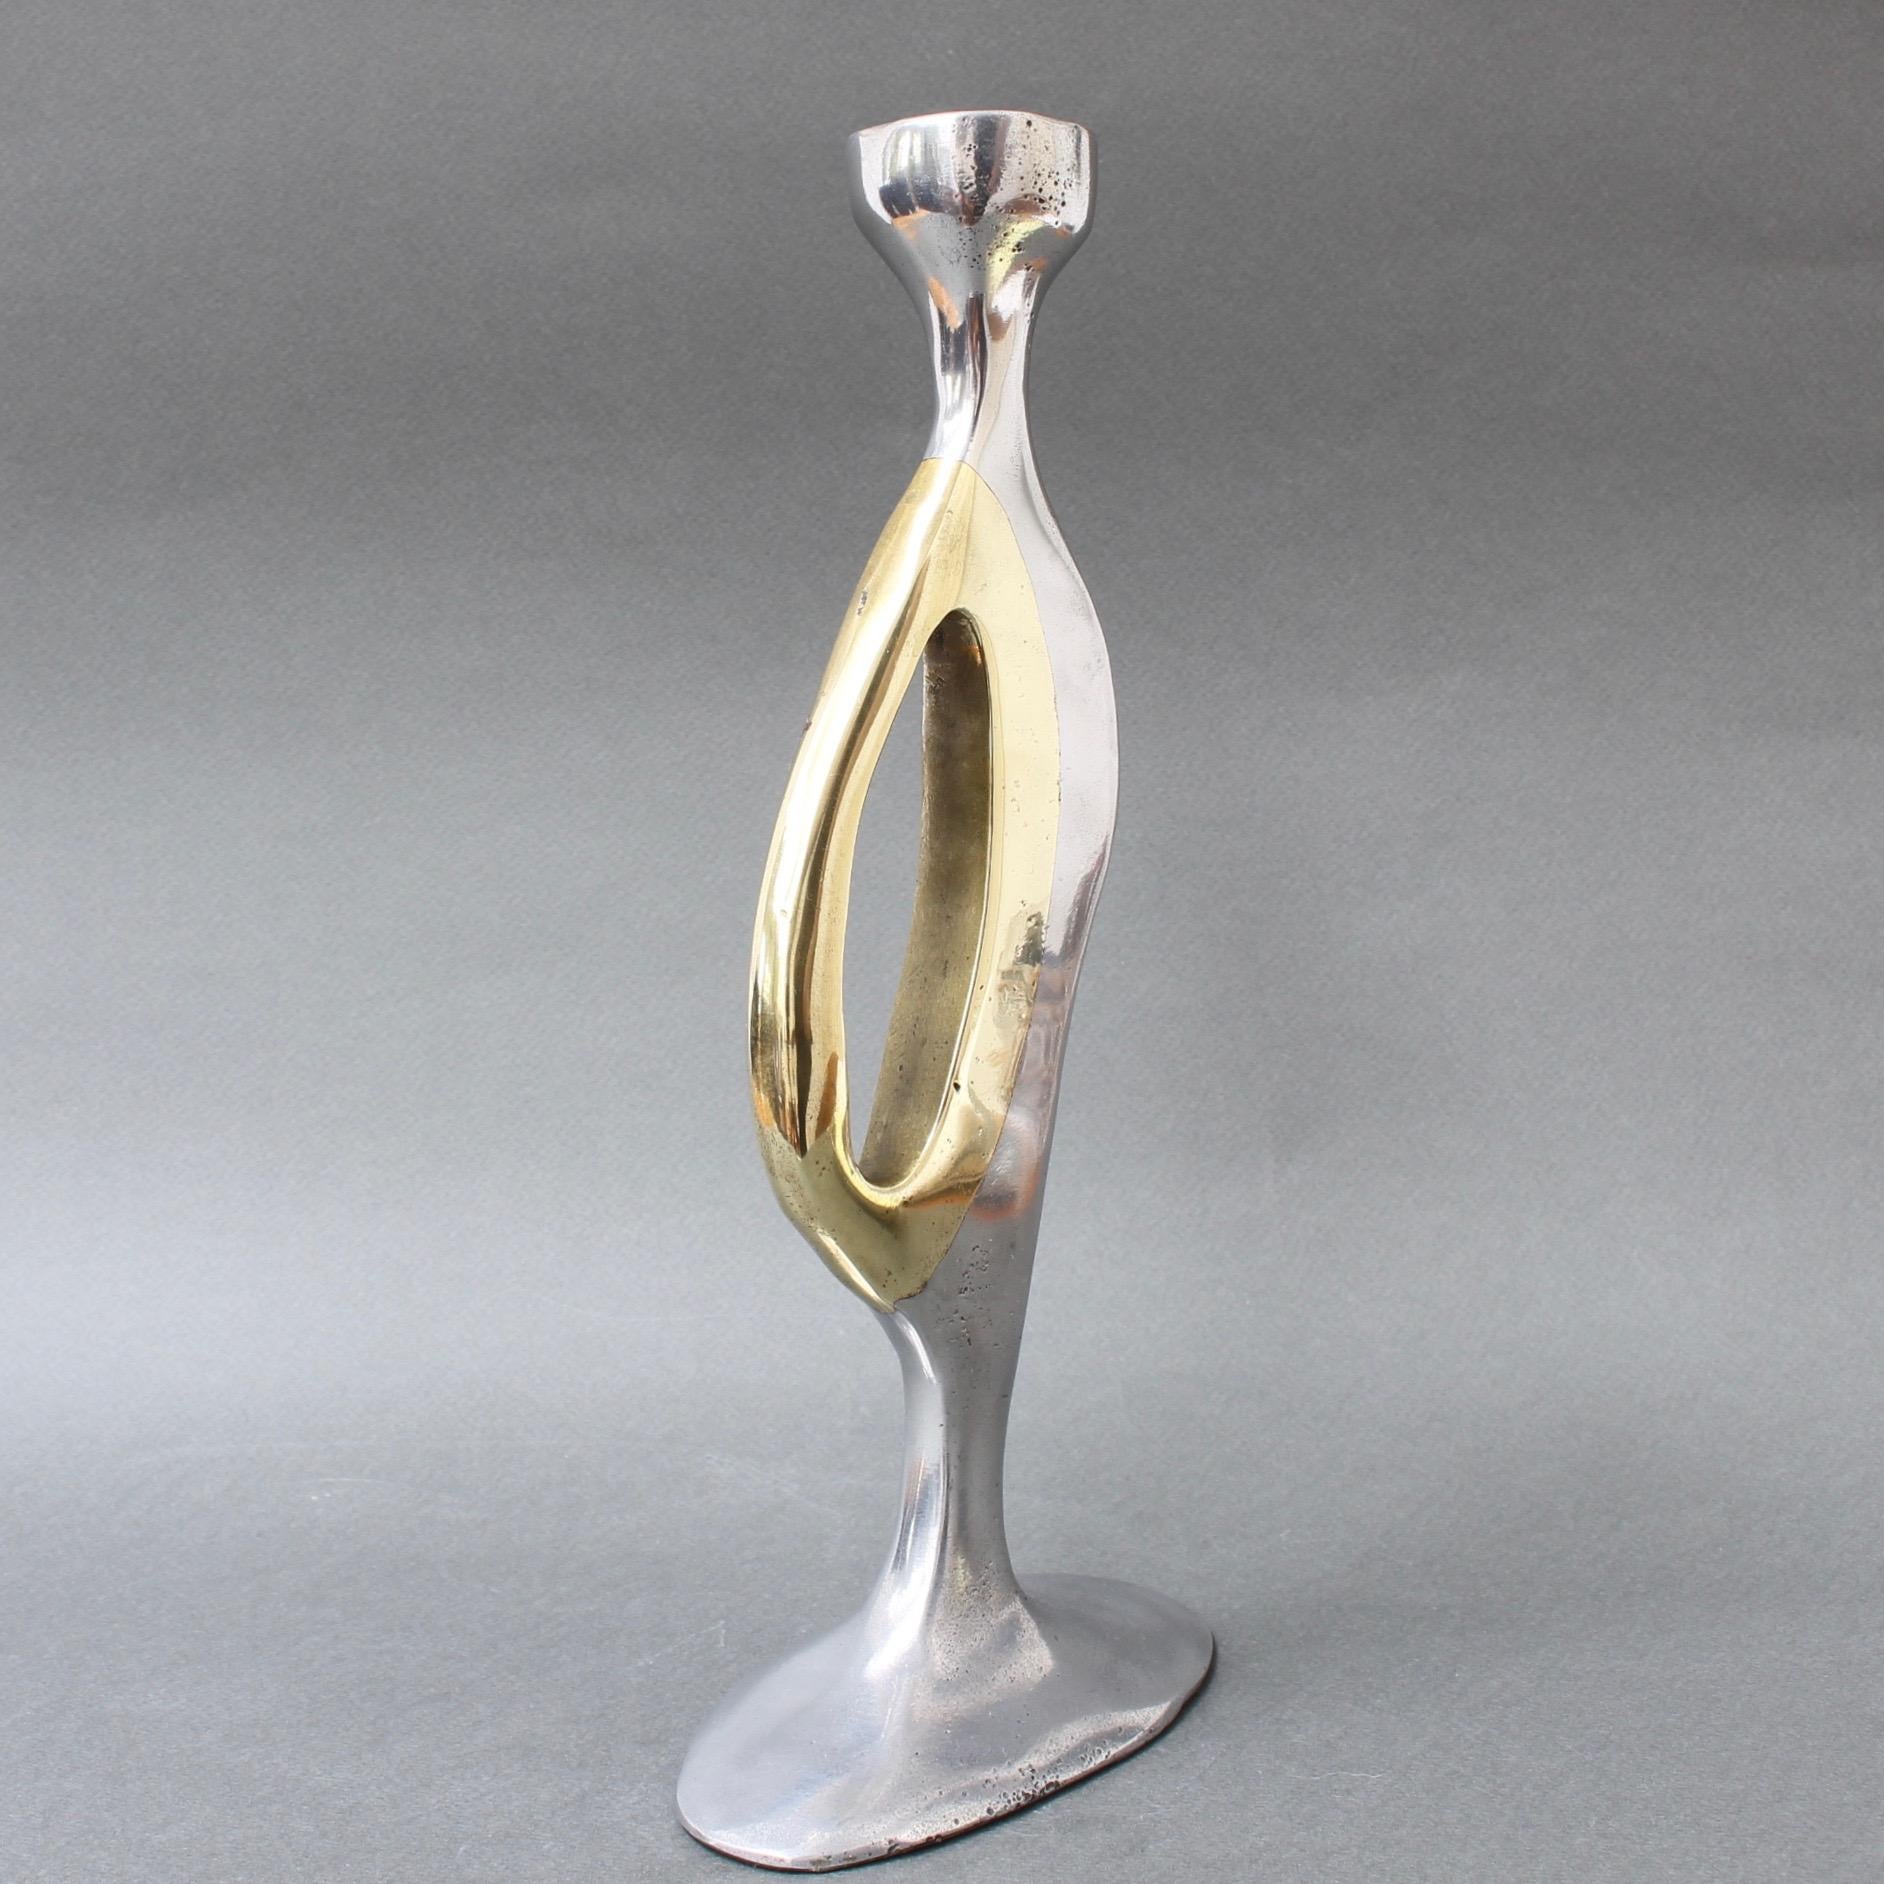 Late 20th Century Aluminium and Brass Brutalist Style Candleholder by Leopold, s.c, 'circa 1970s'